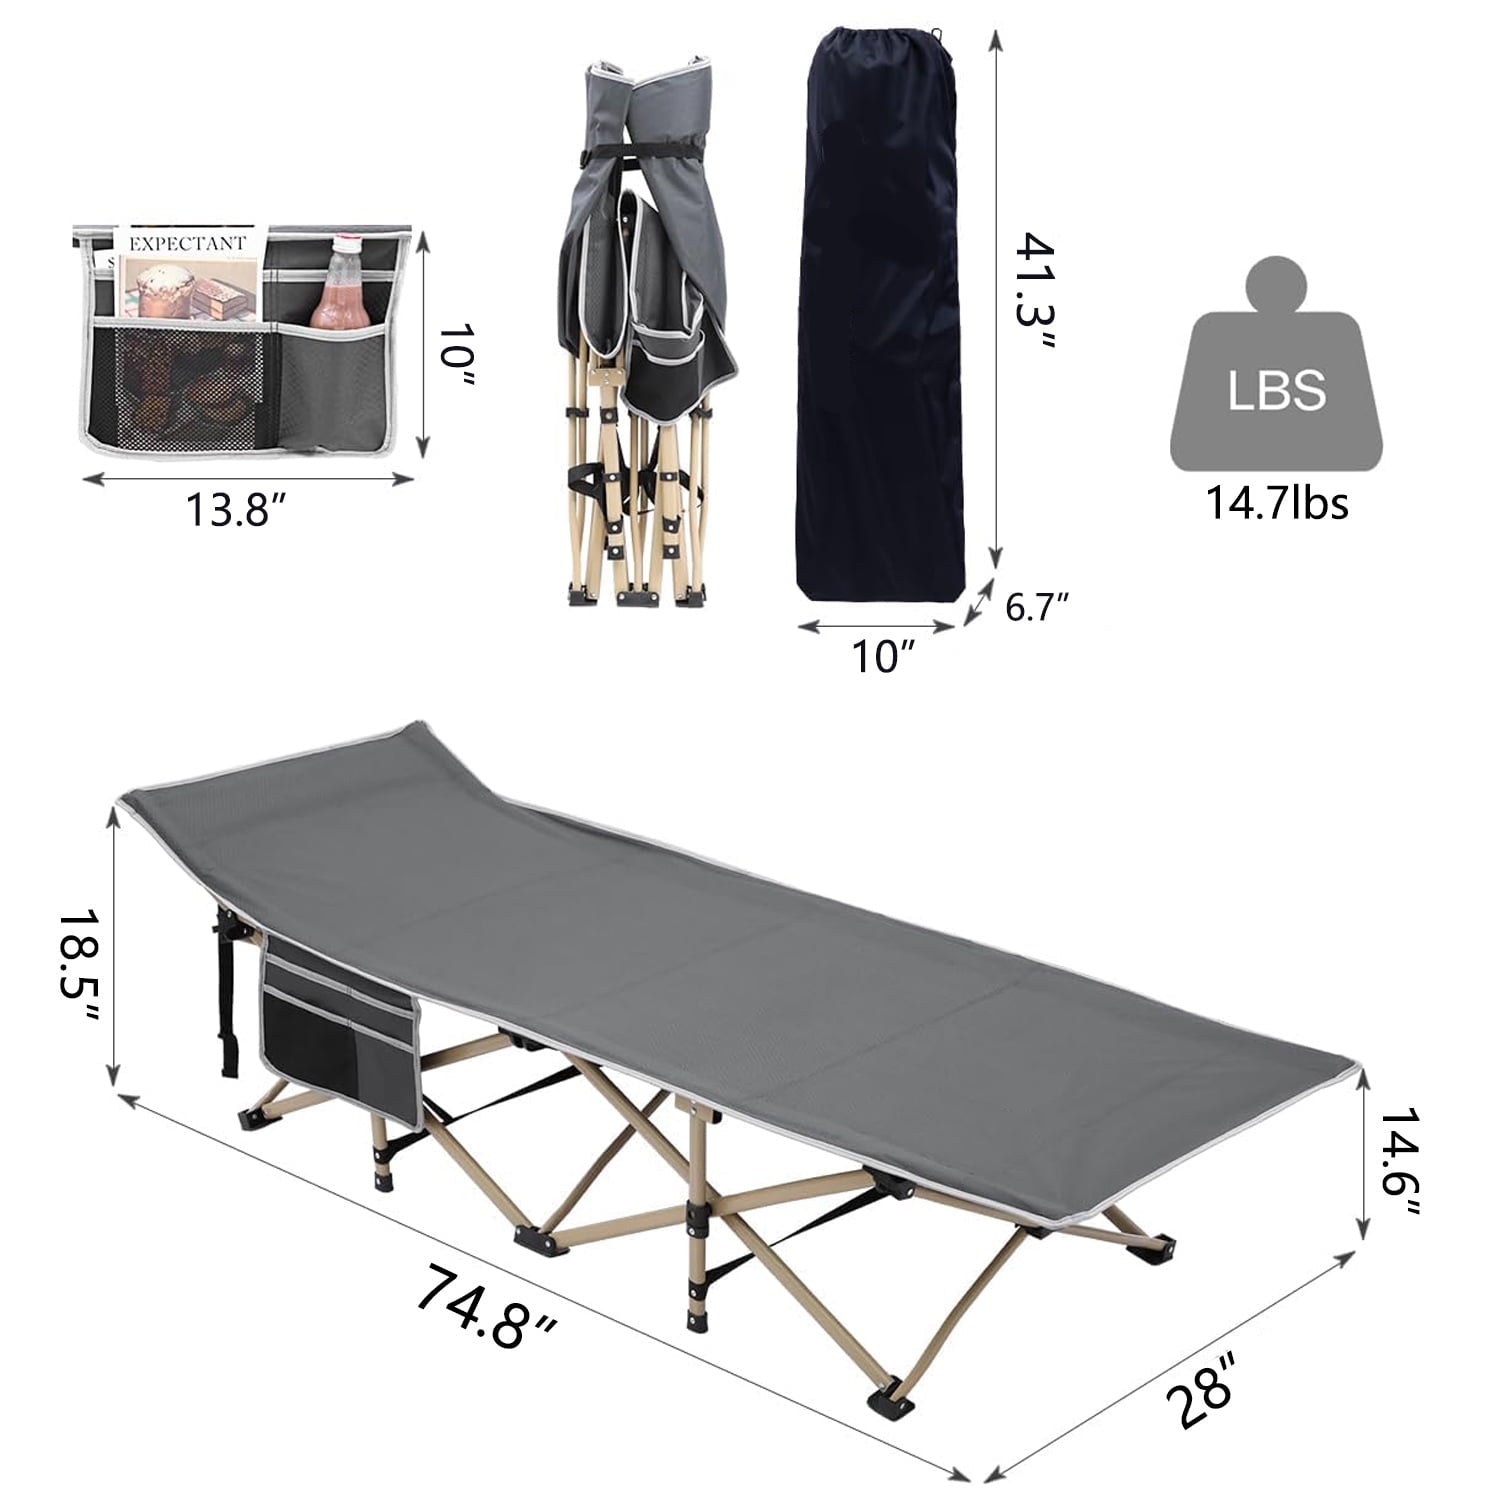 SUGIFT?Portable?Folding?Bed?with?2?Sided?Mattress?&?Carry?Bag?74.8in*28?in*14.6?in